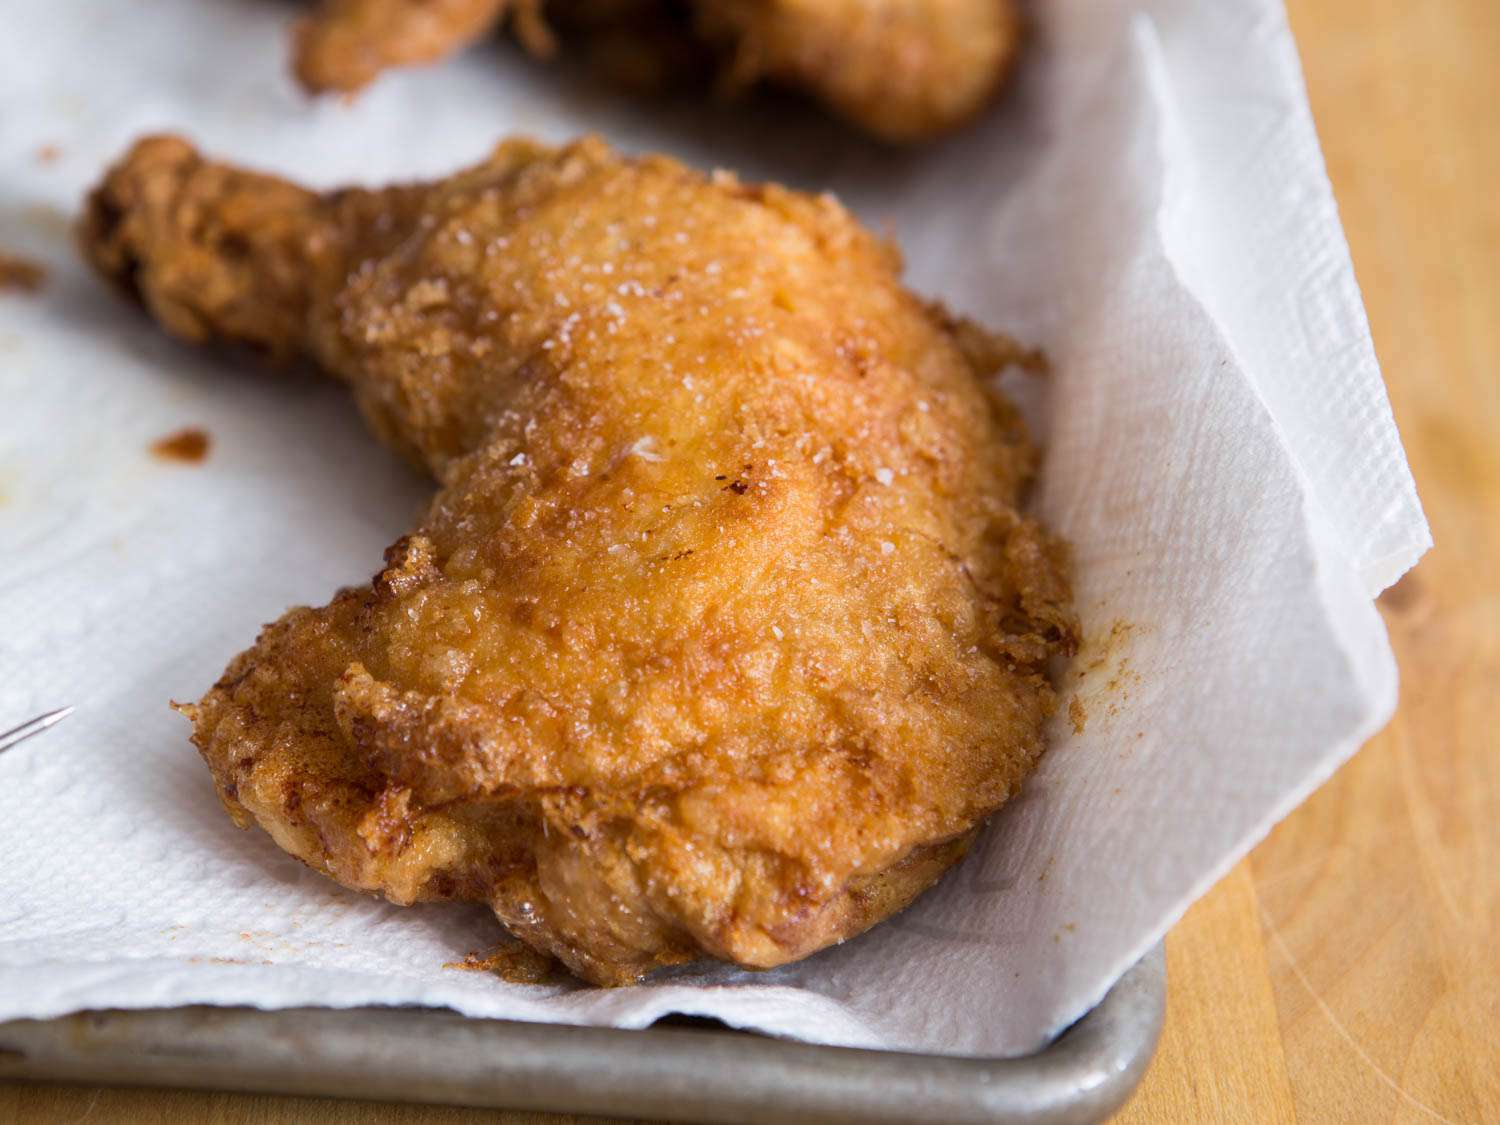 Fried chicken resting on paper towels set in a rimmed baking sheet